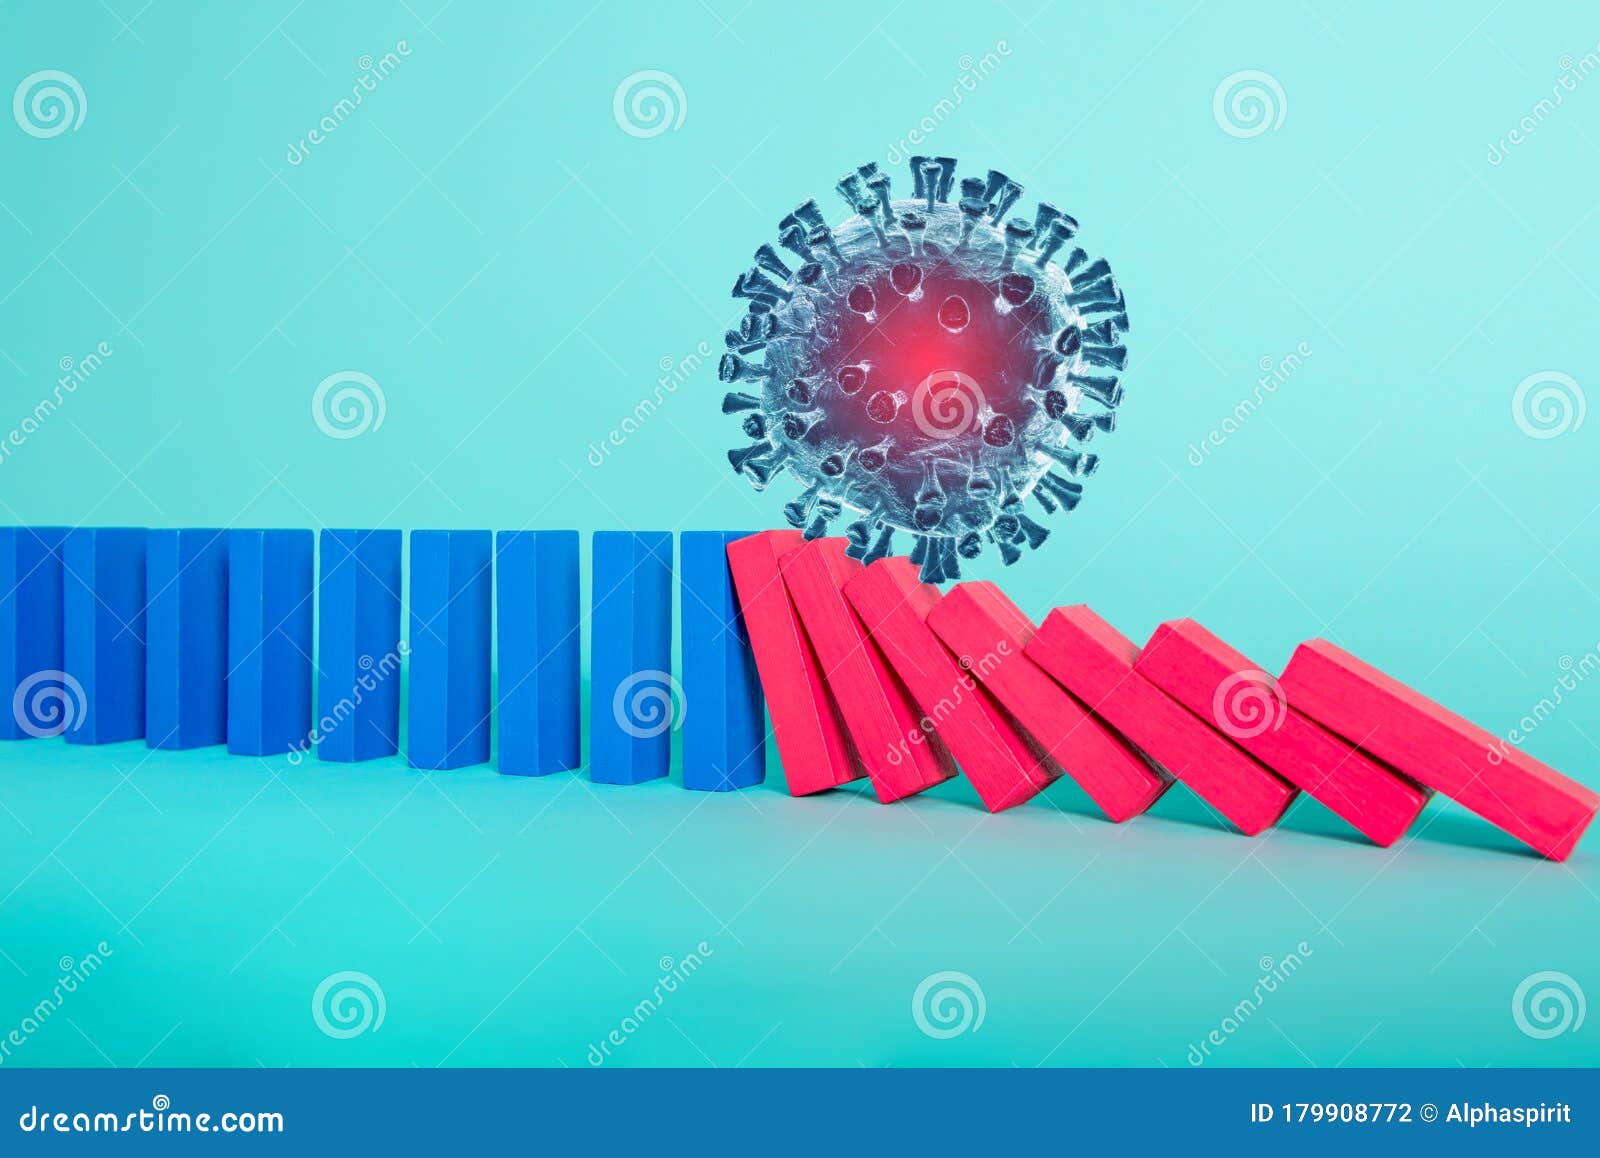 concept of covid19 coronavirus pandemic with falling chain like a domino game. contagion and infection progression. cyan